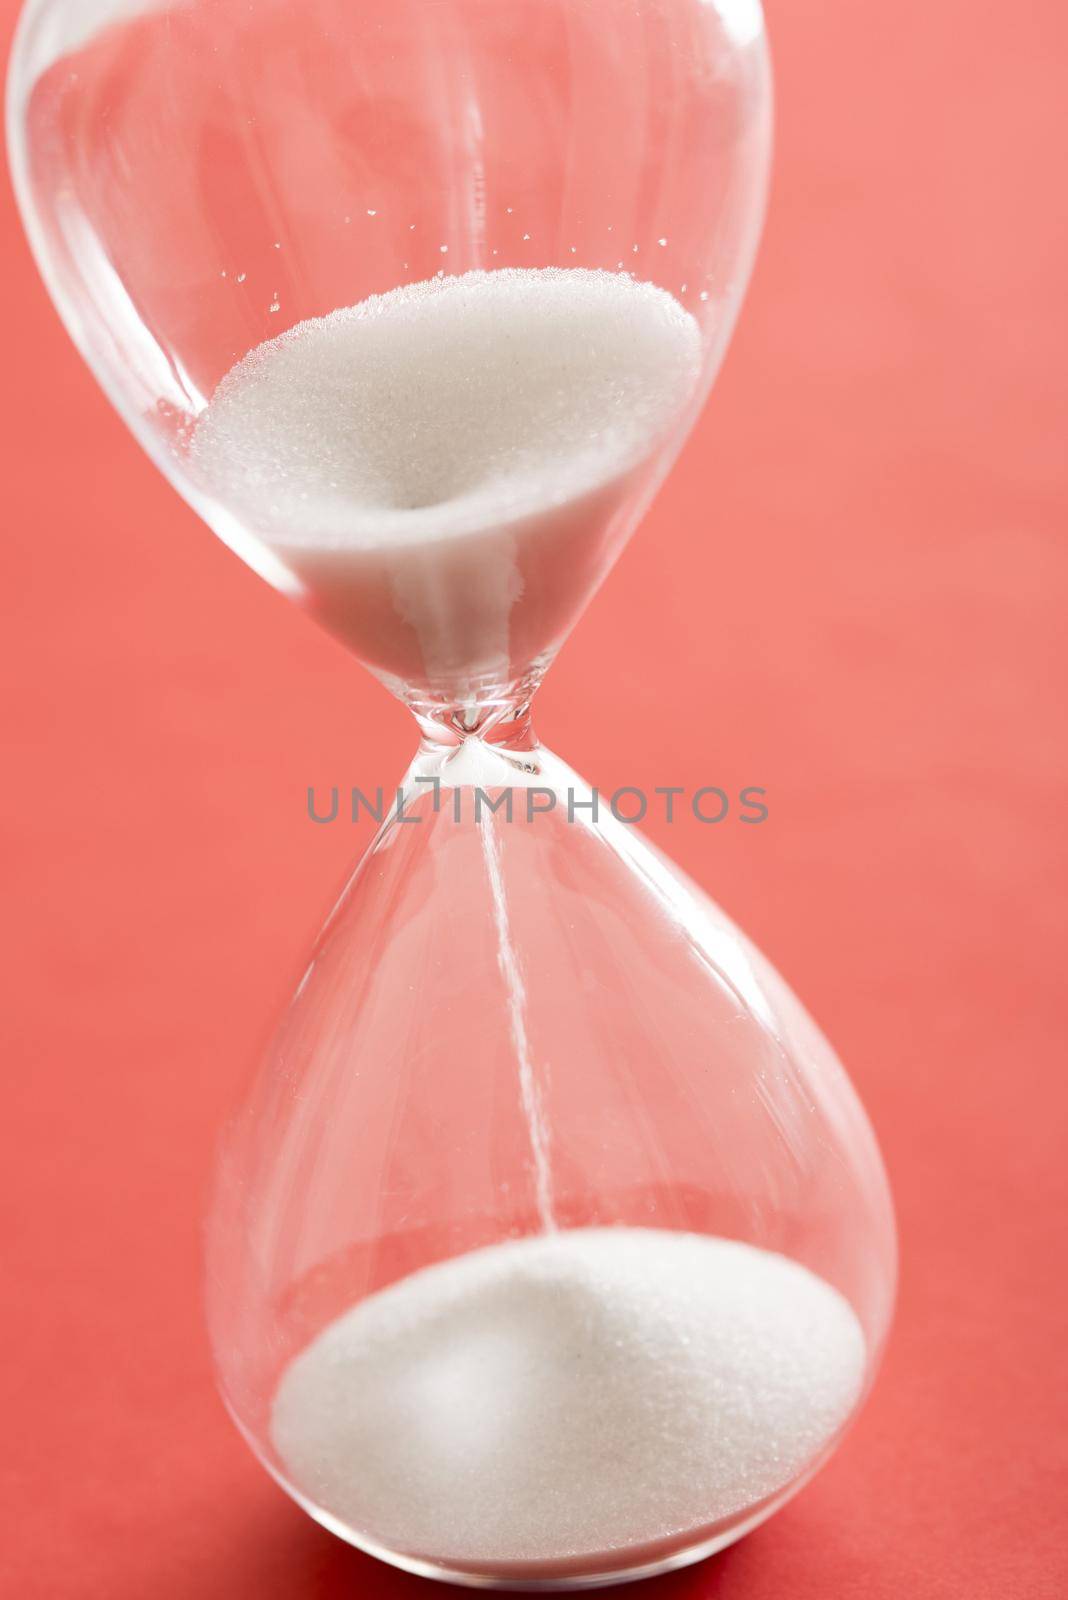 White sand running through an hourglass or egg timer measuring passing time counting down to the end or a deadline over a red background